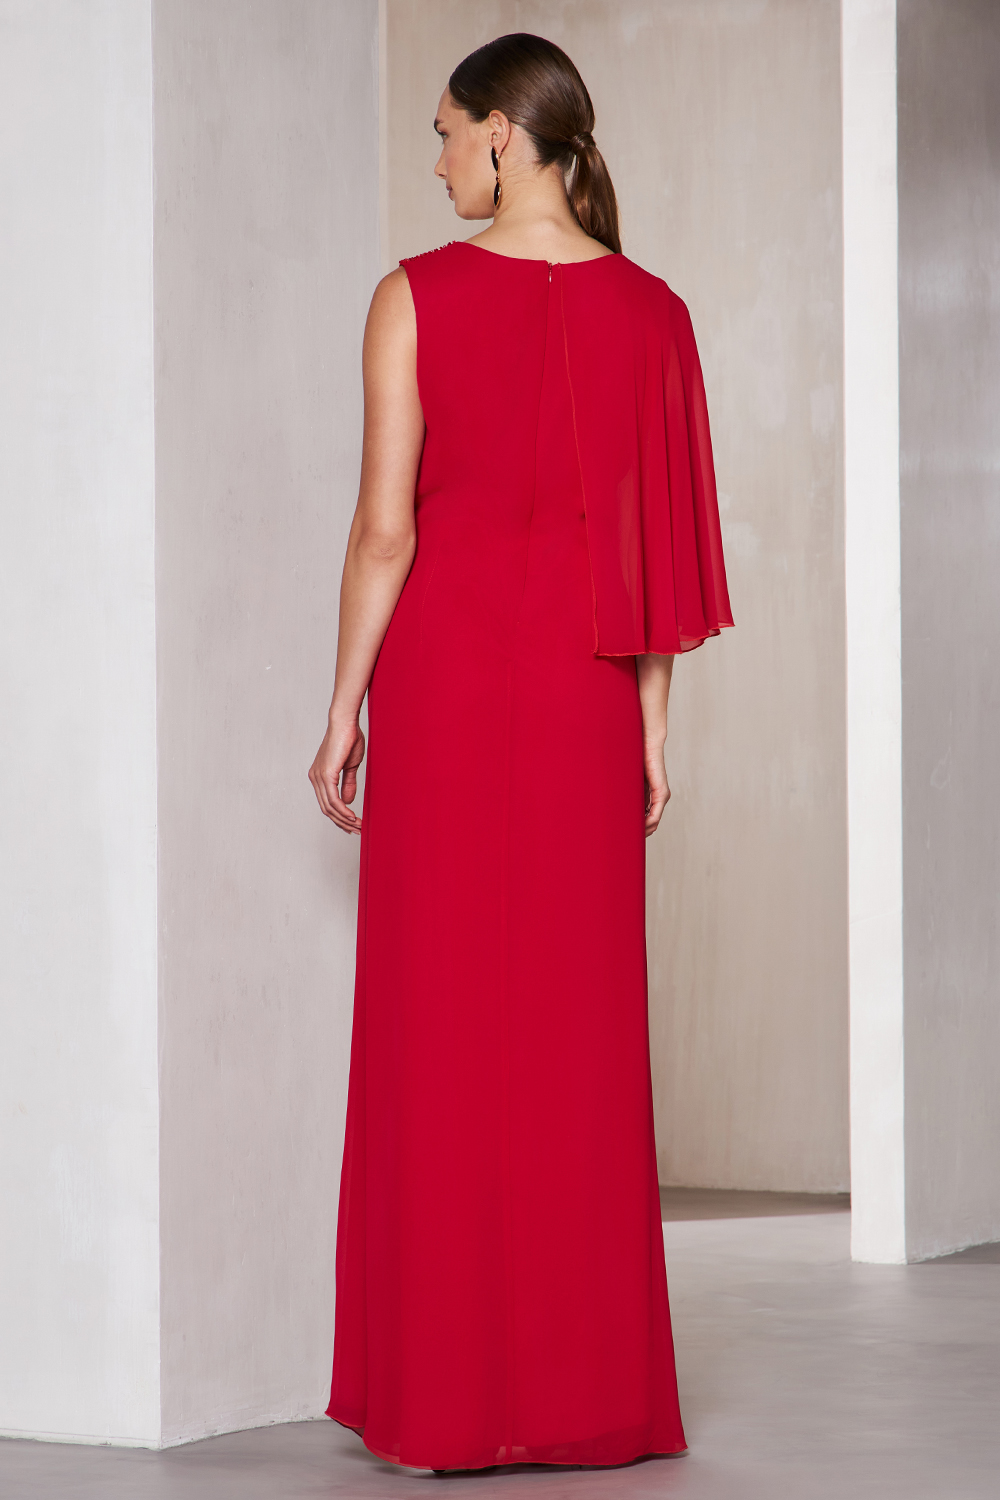 Classic Dresses / Long evening dress with chiffon fabric and beading at the shoulder